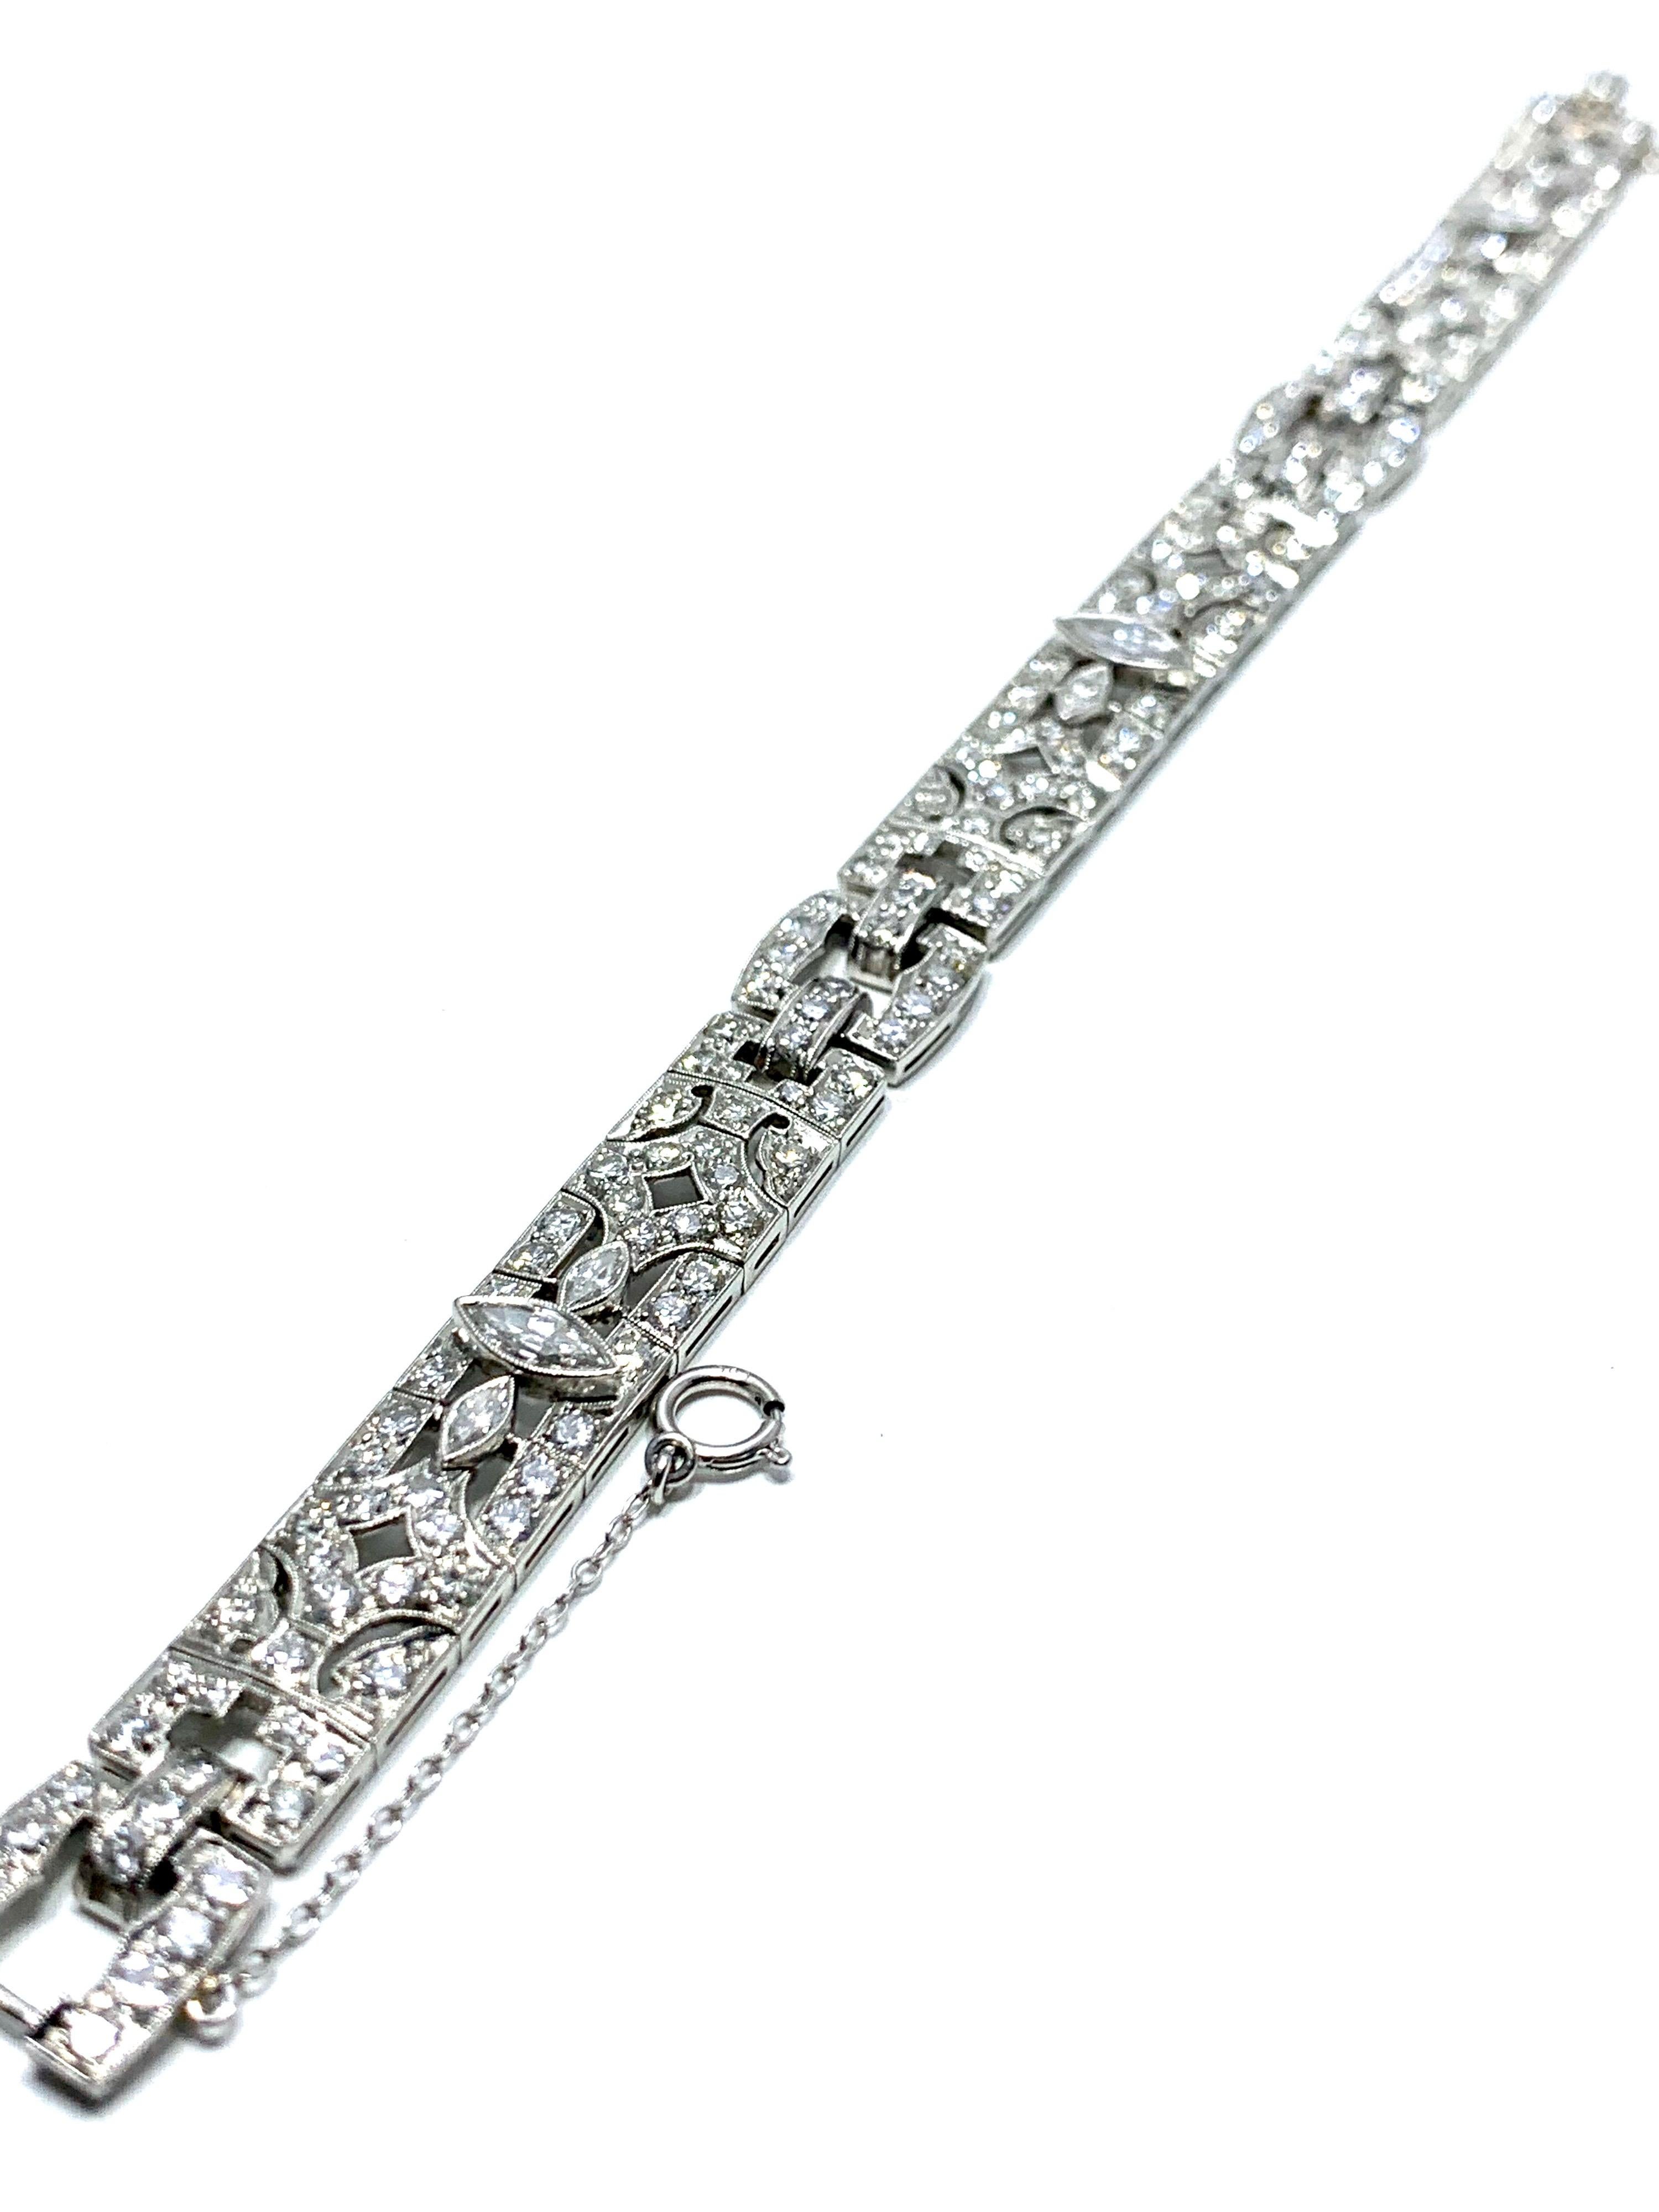 A beautiful Art Deco Style Diamond and platinum bracelet.  The 6.26 carats in Diamonds is made up of round and marquise cuts, set in handcrafted milgrain edged platinum links.  The Diamonds are G-H color, and VS clarity.  The bracelet is 7.50 inches